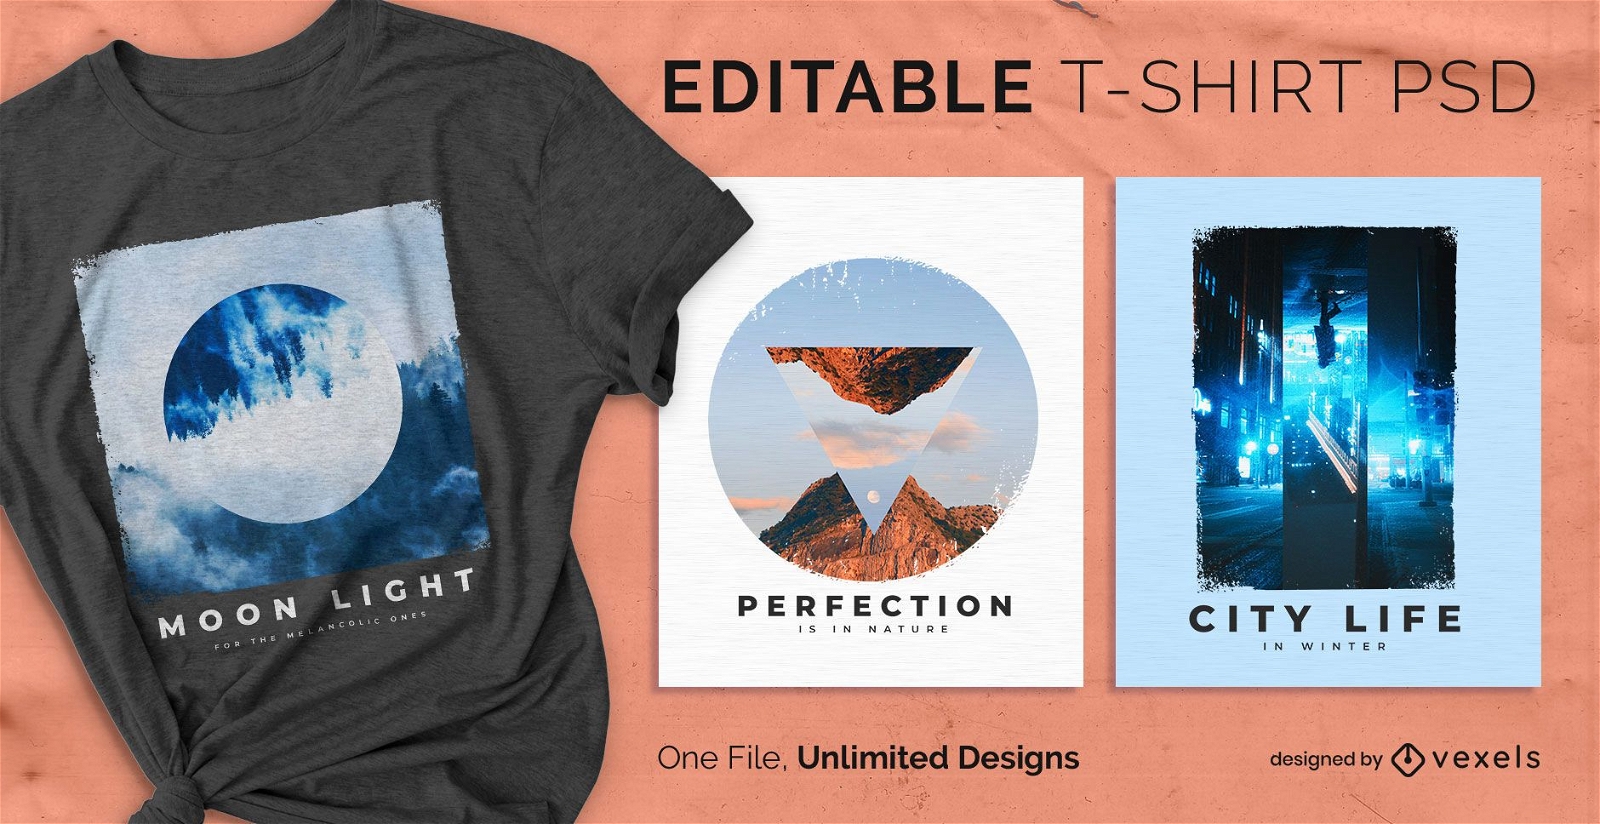 Inverted scalable t-shirt psd